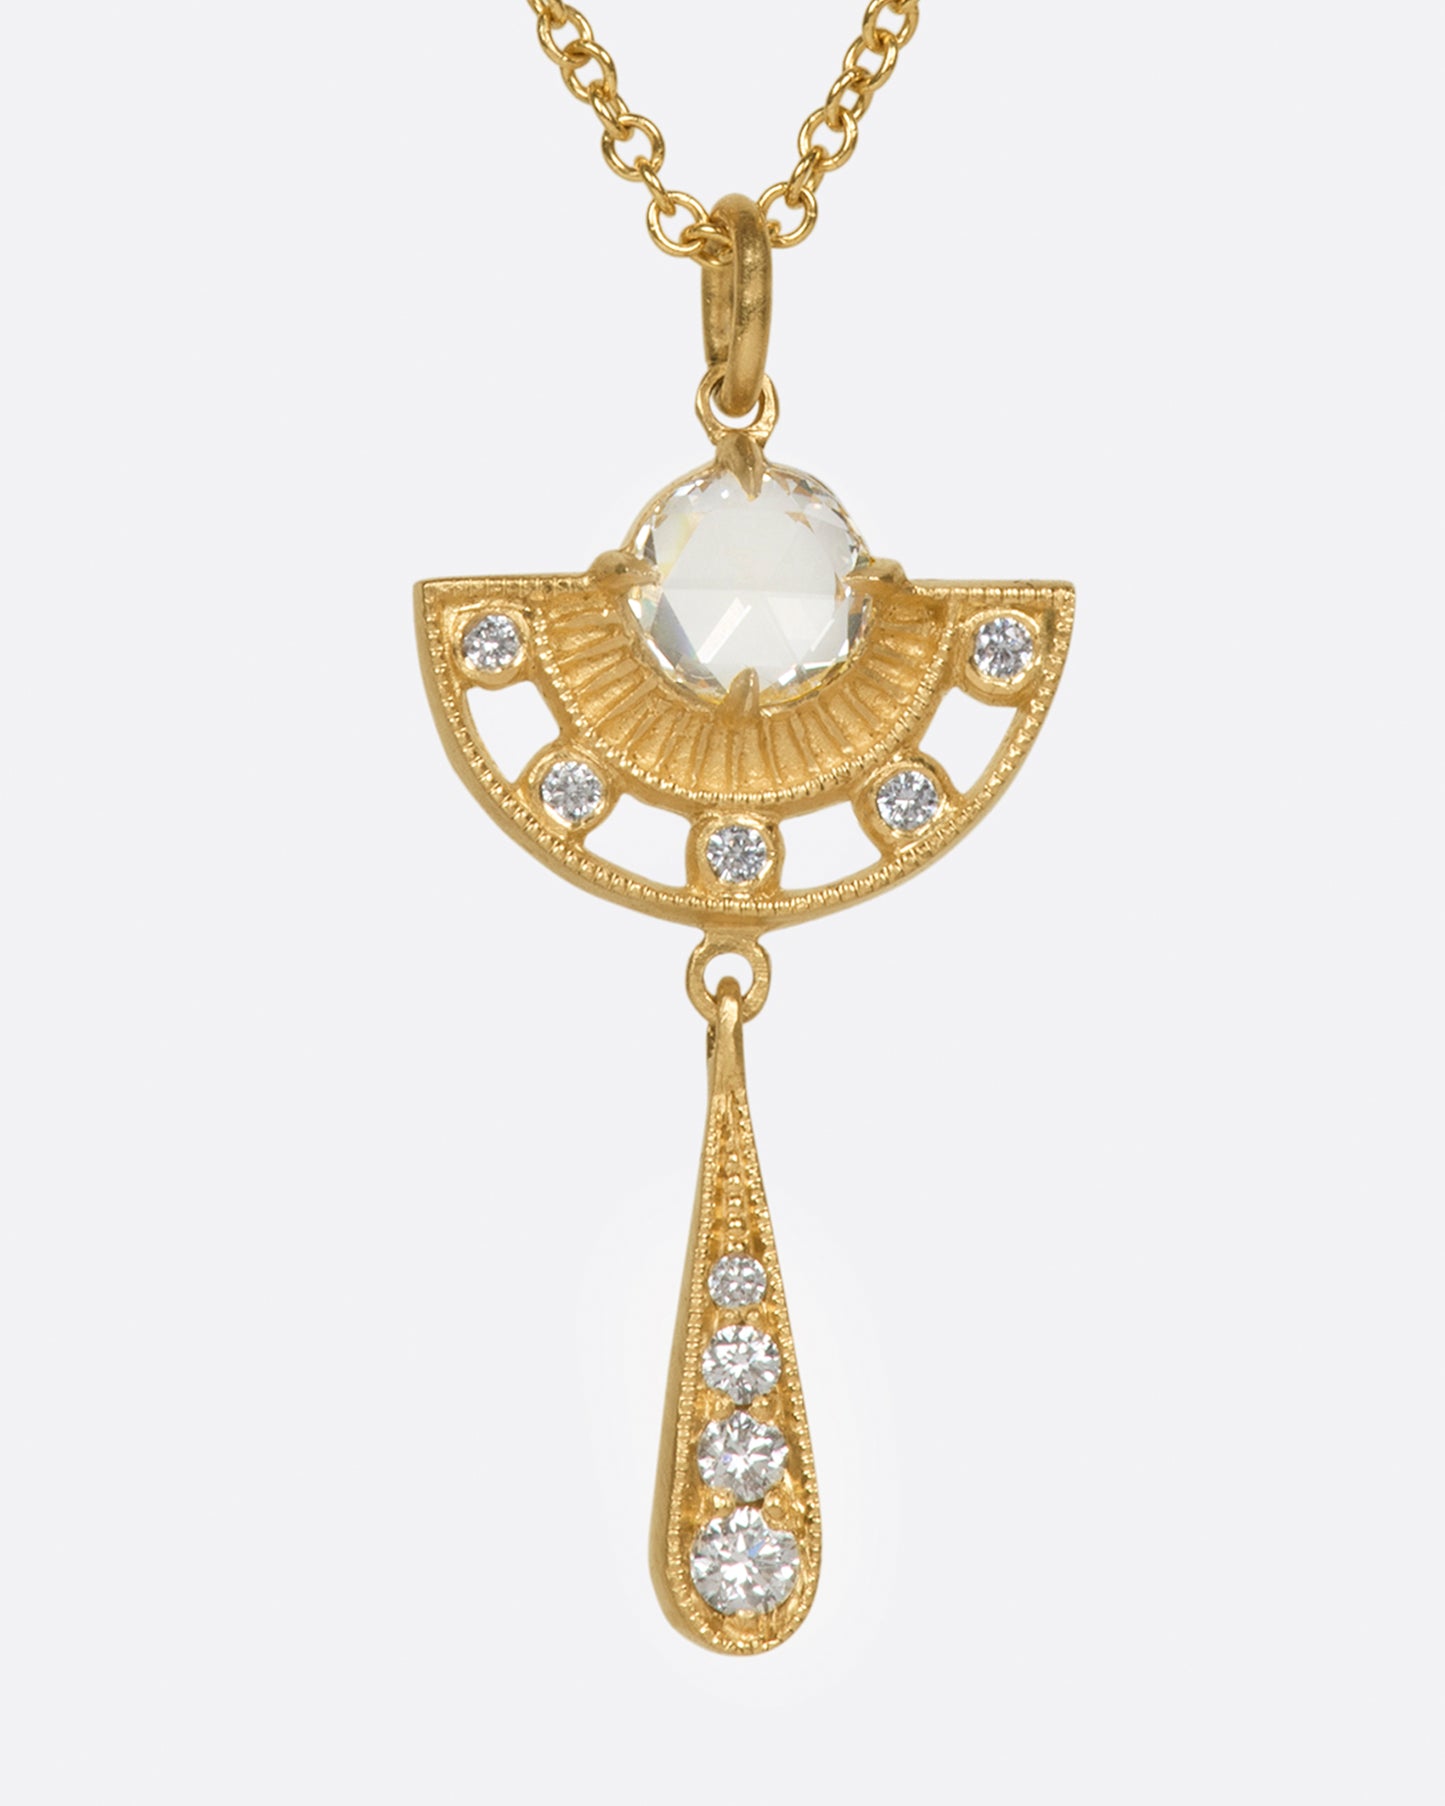 A rose cut diamond sit at the heart of this cutout drop pendant.